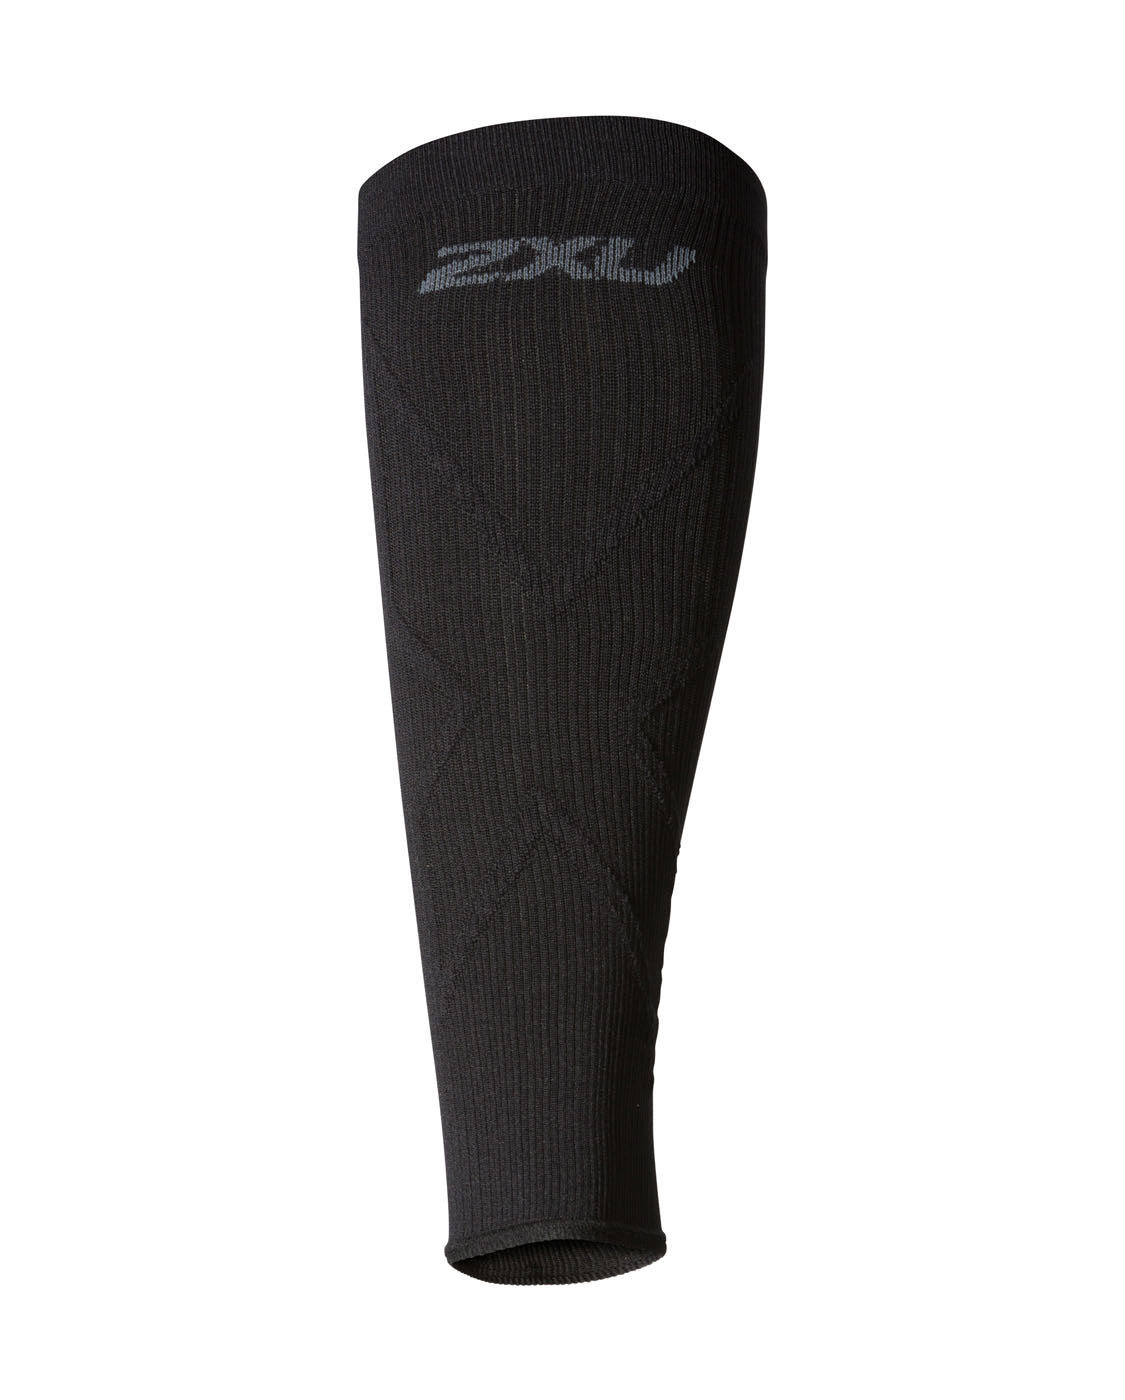 Calf Compression Sleeves for Men and Women (for Sports, X-Large